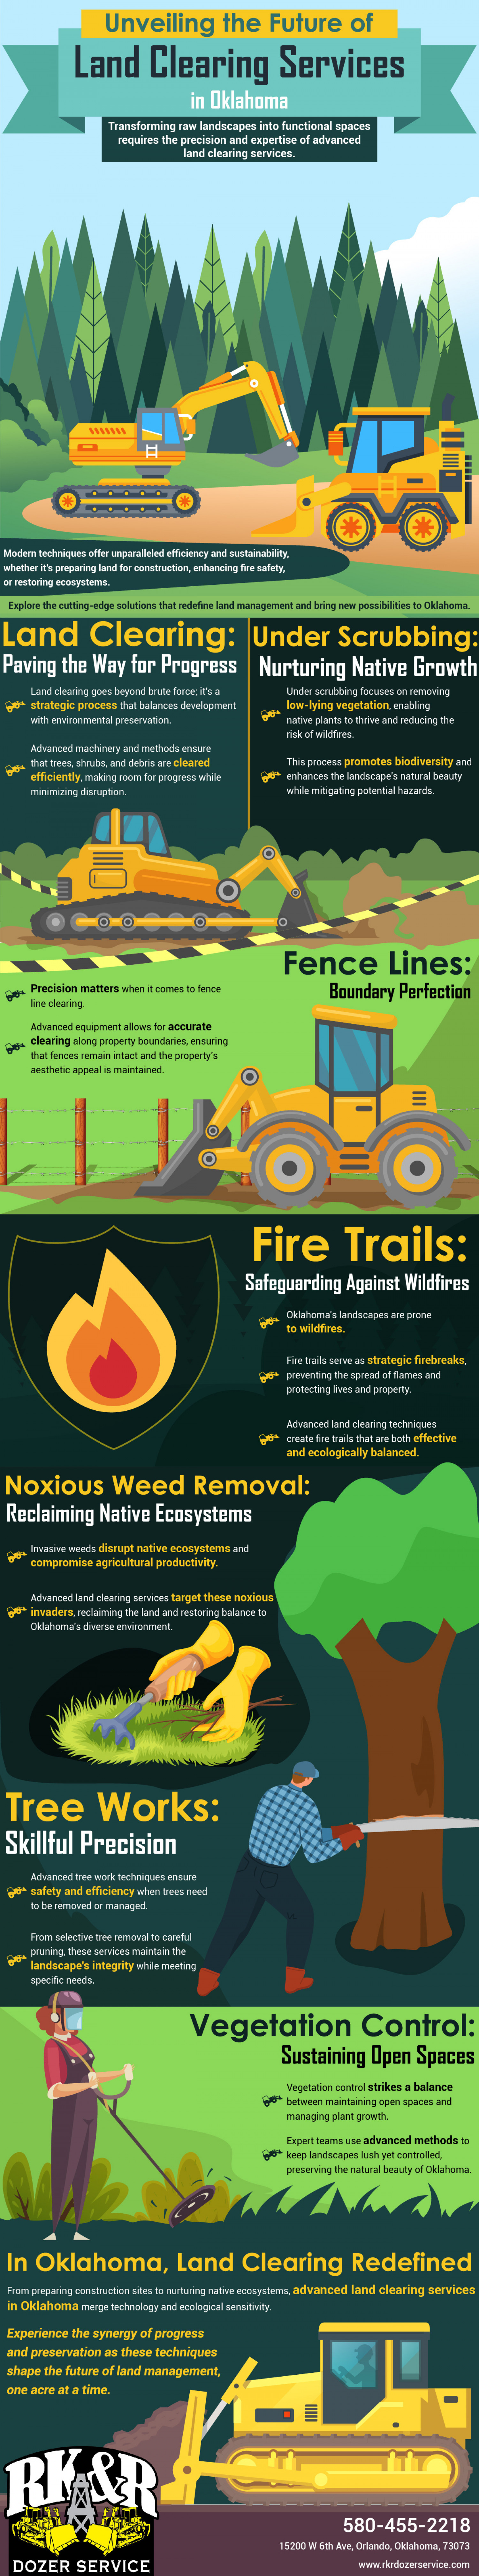 Unveiling The Future Of Land Clearing Services In Oklahoma Infographic